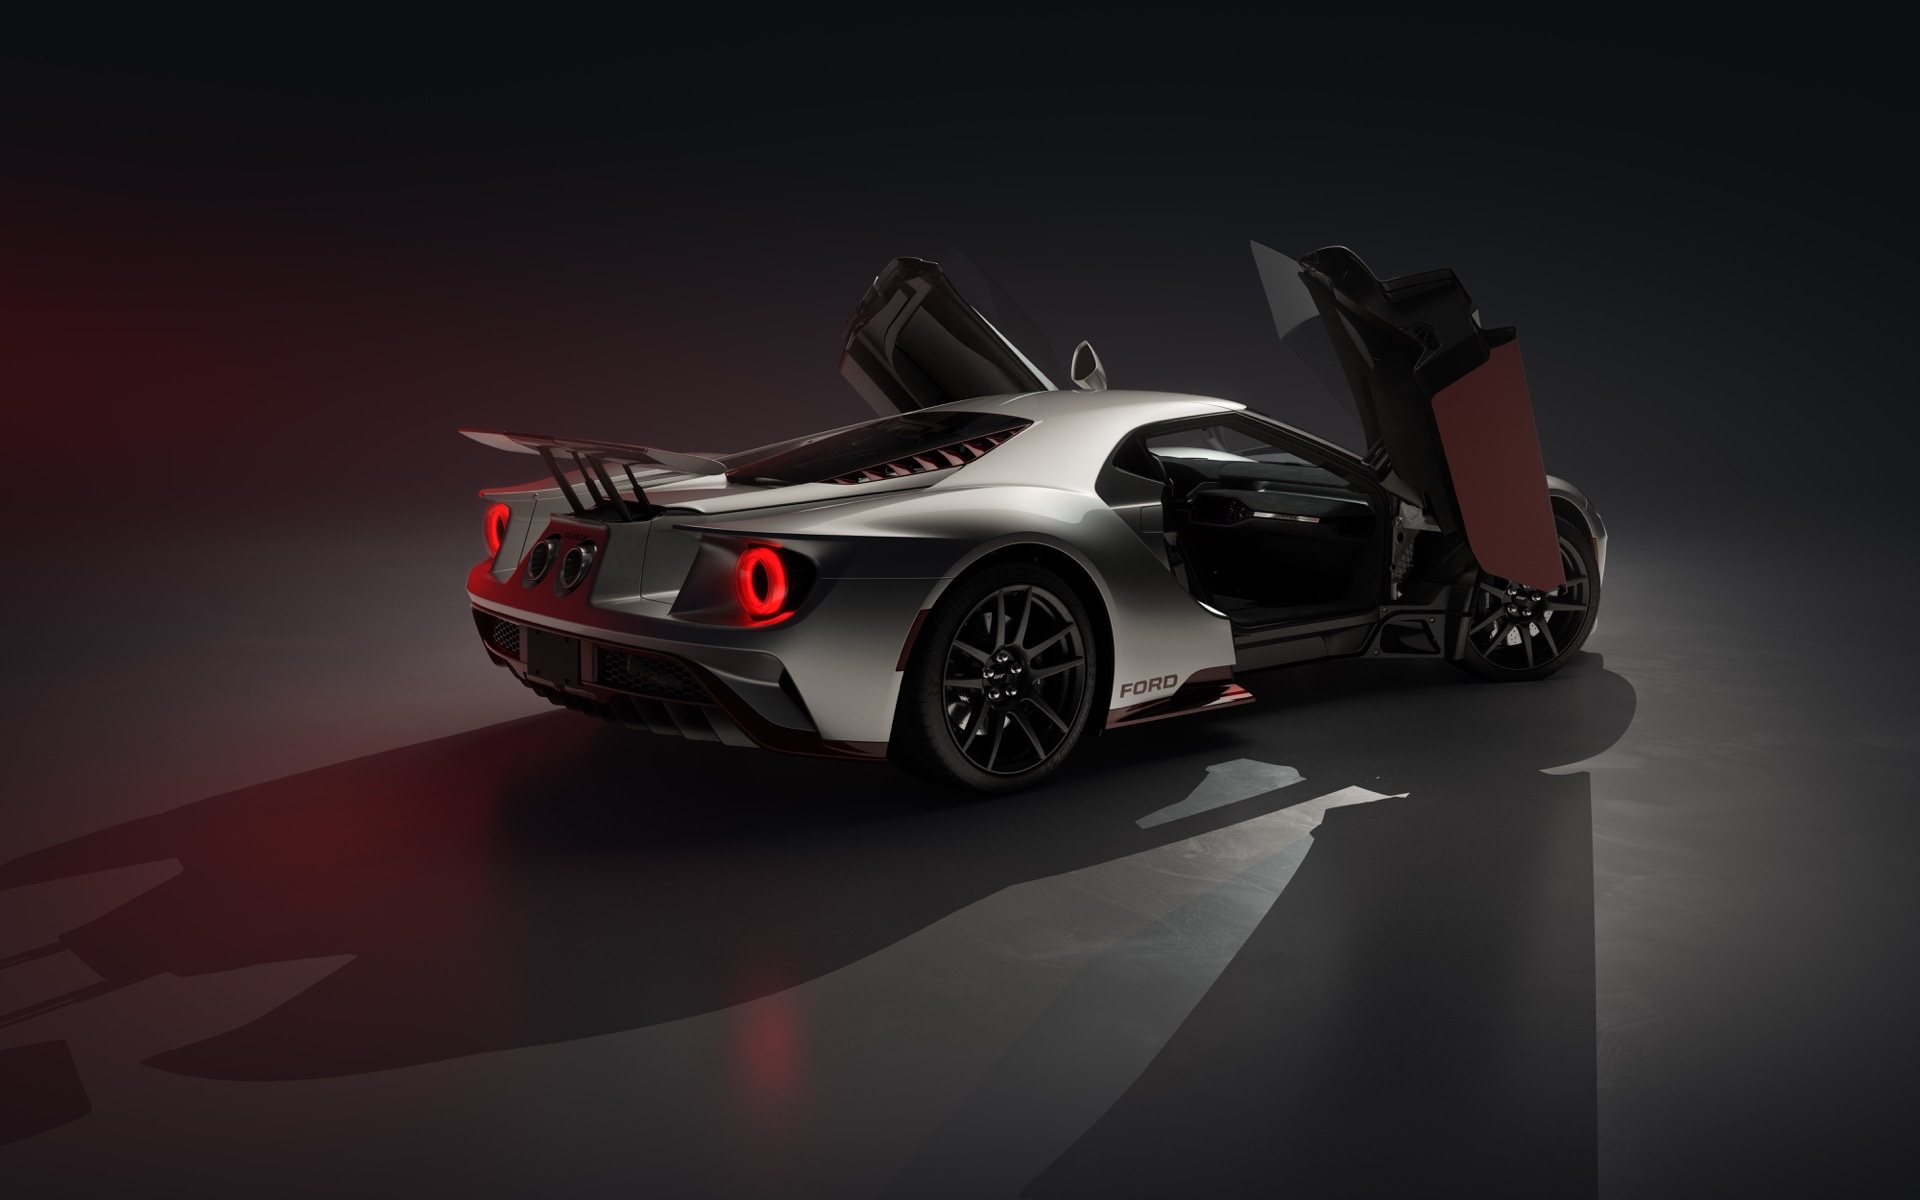 Ford GT LM Edition